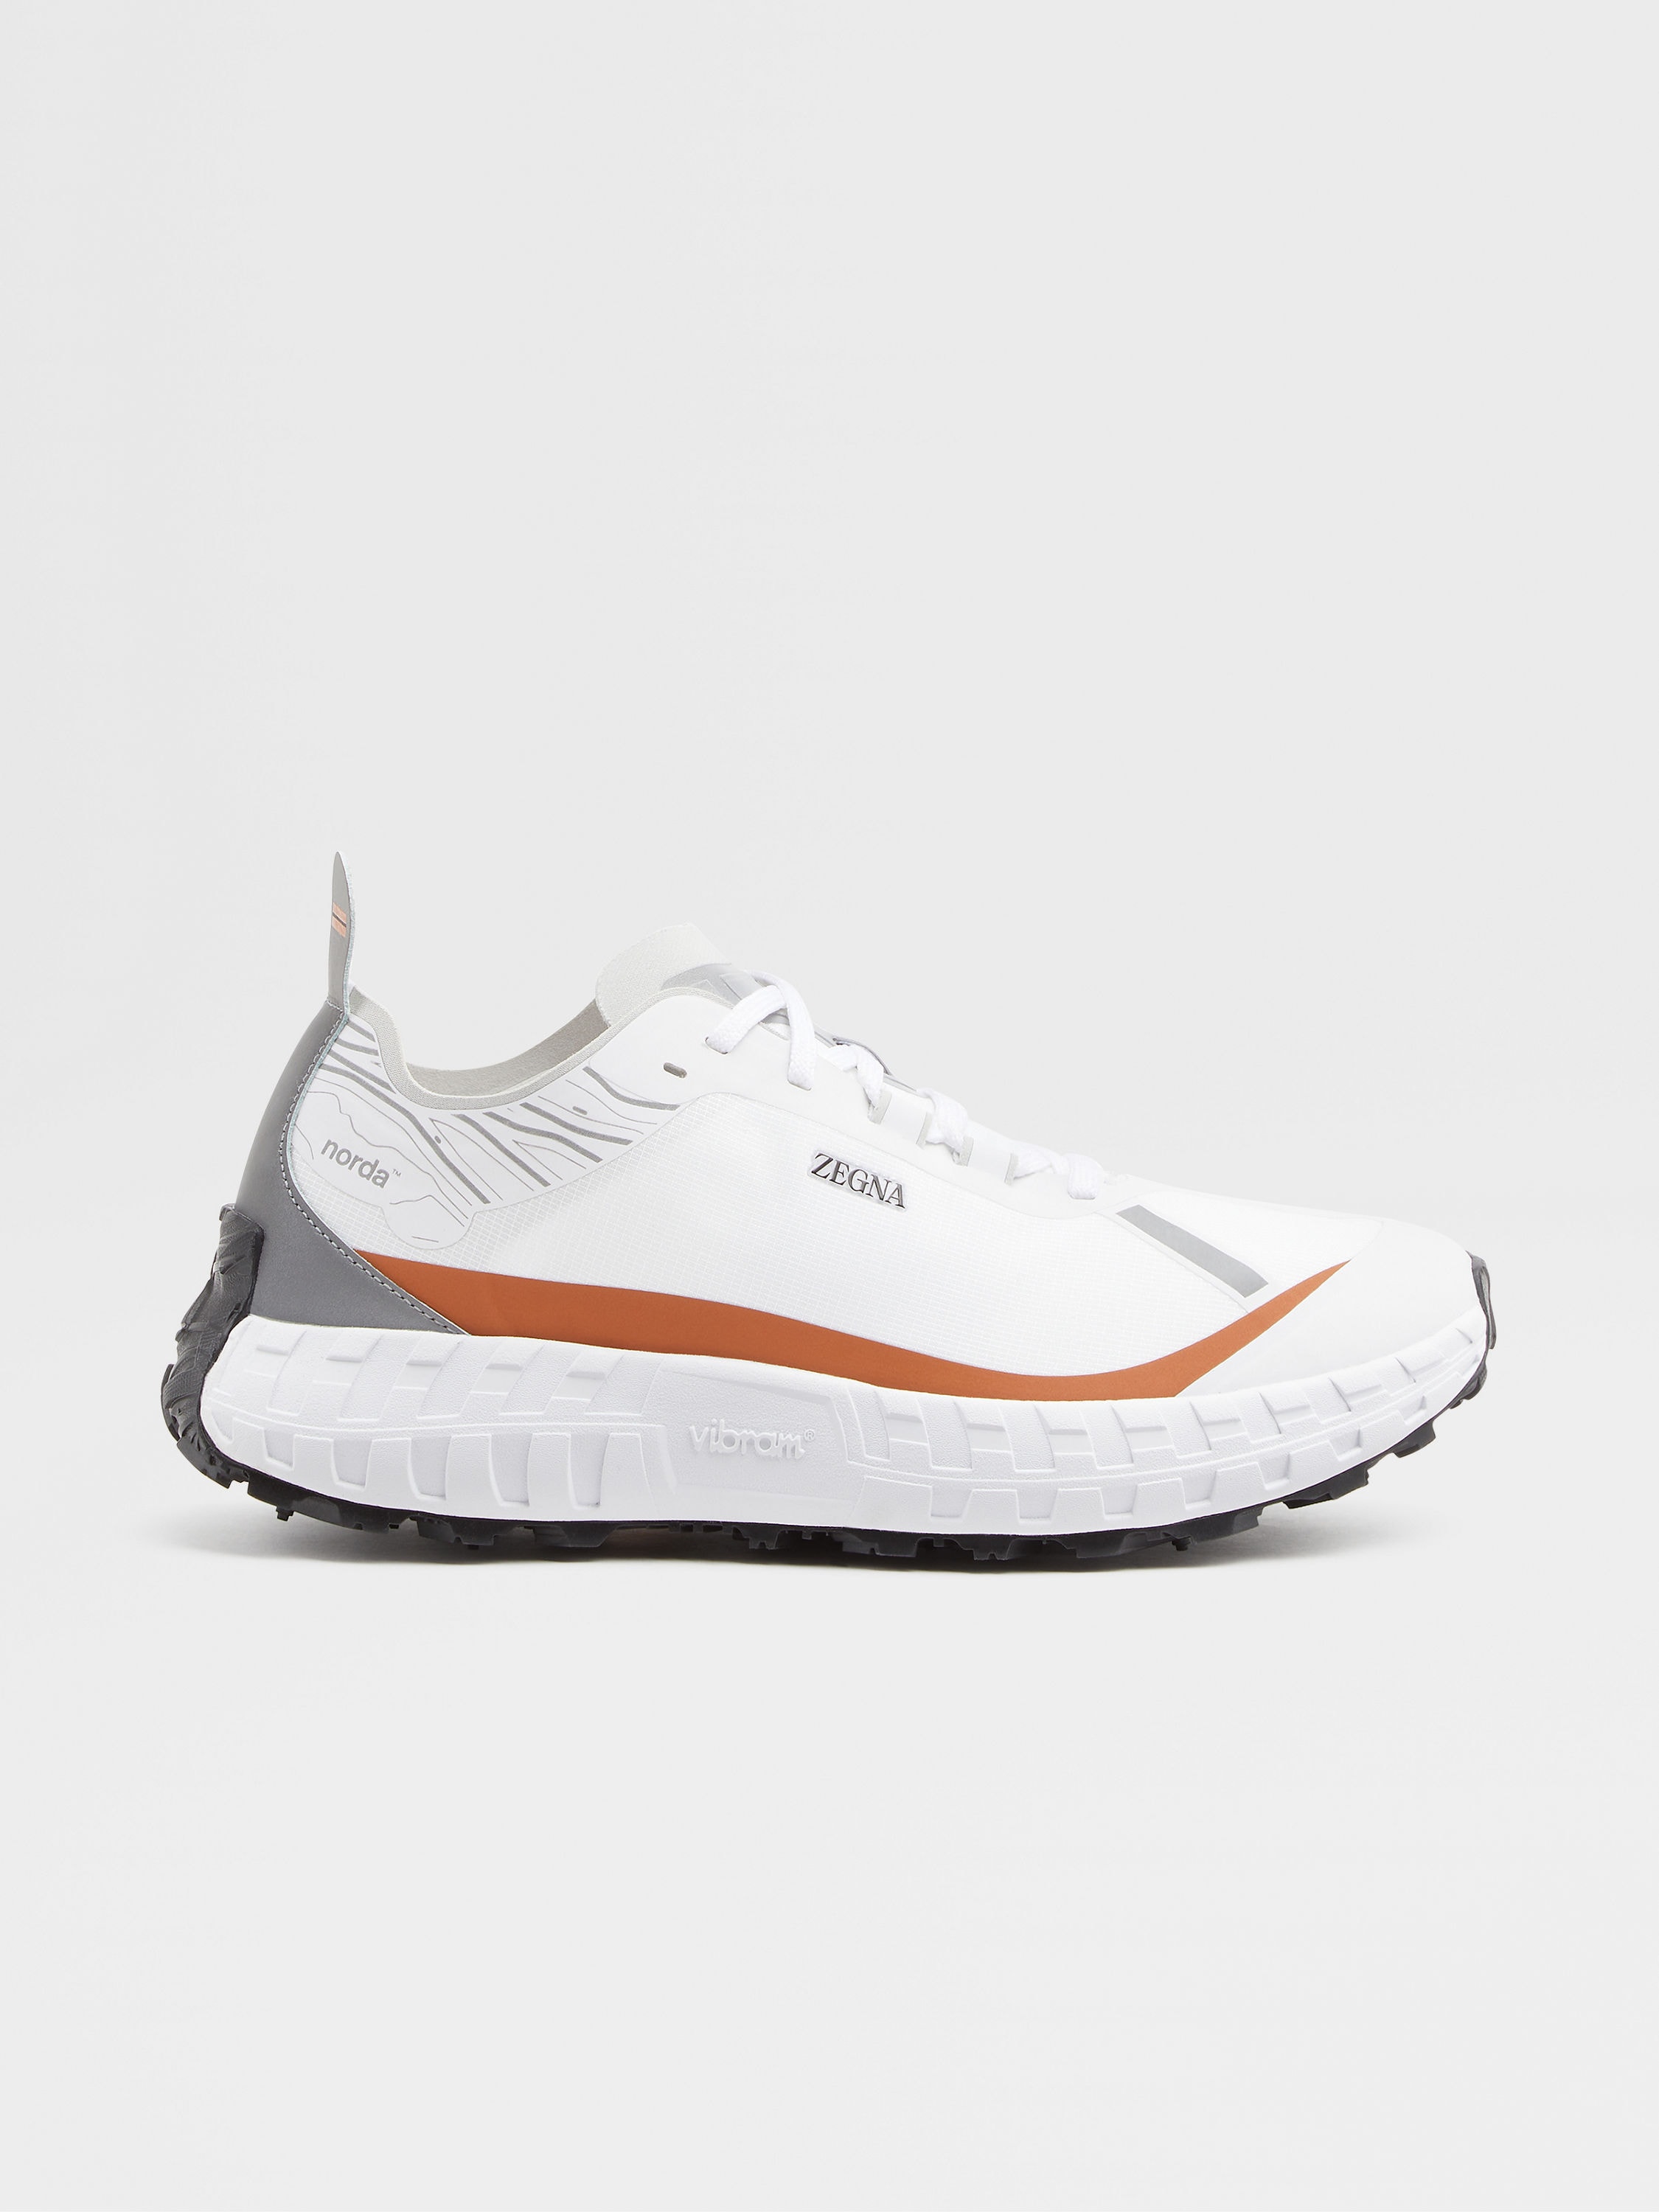 ZEGNA x norda™ 001 White Technical Fabric Sneakers